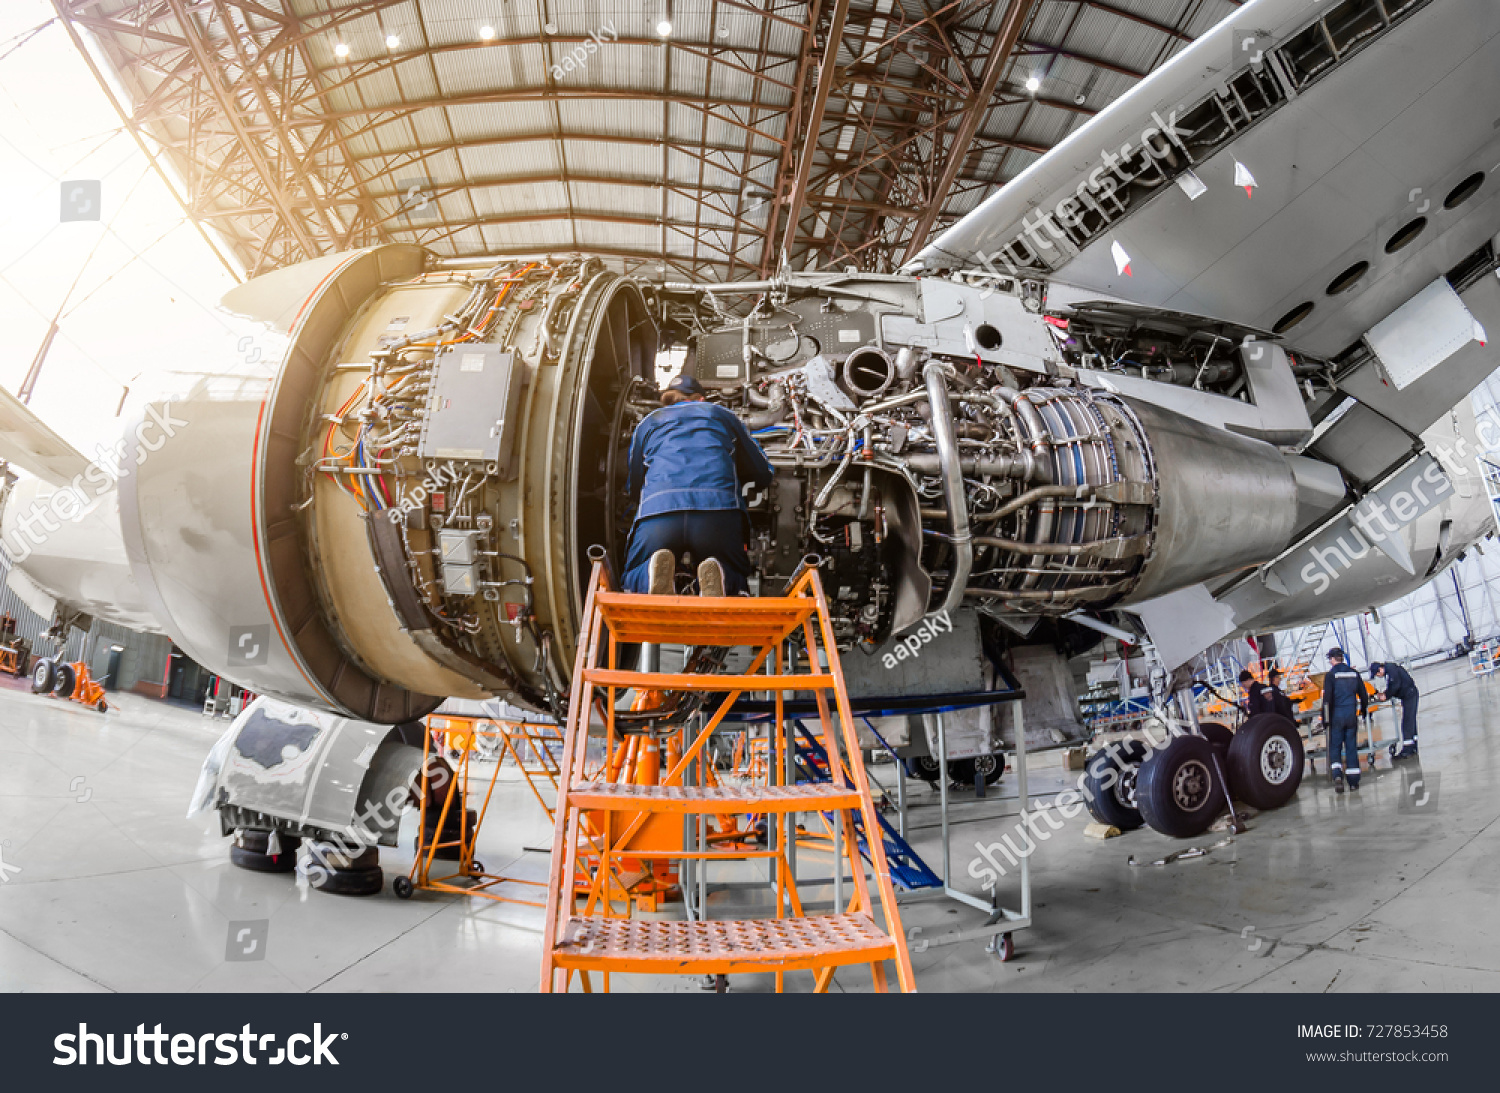 Specialist mechanic repairs the maintenance of a large engine of a passenger aircraft in a hangar #727853458